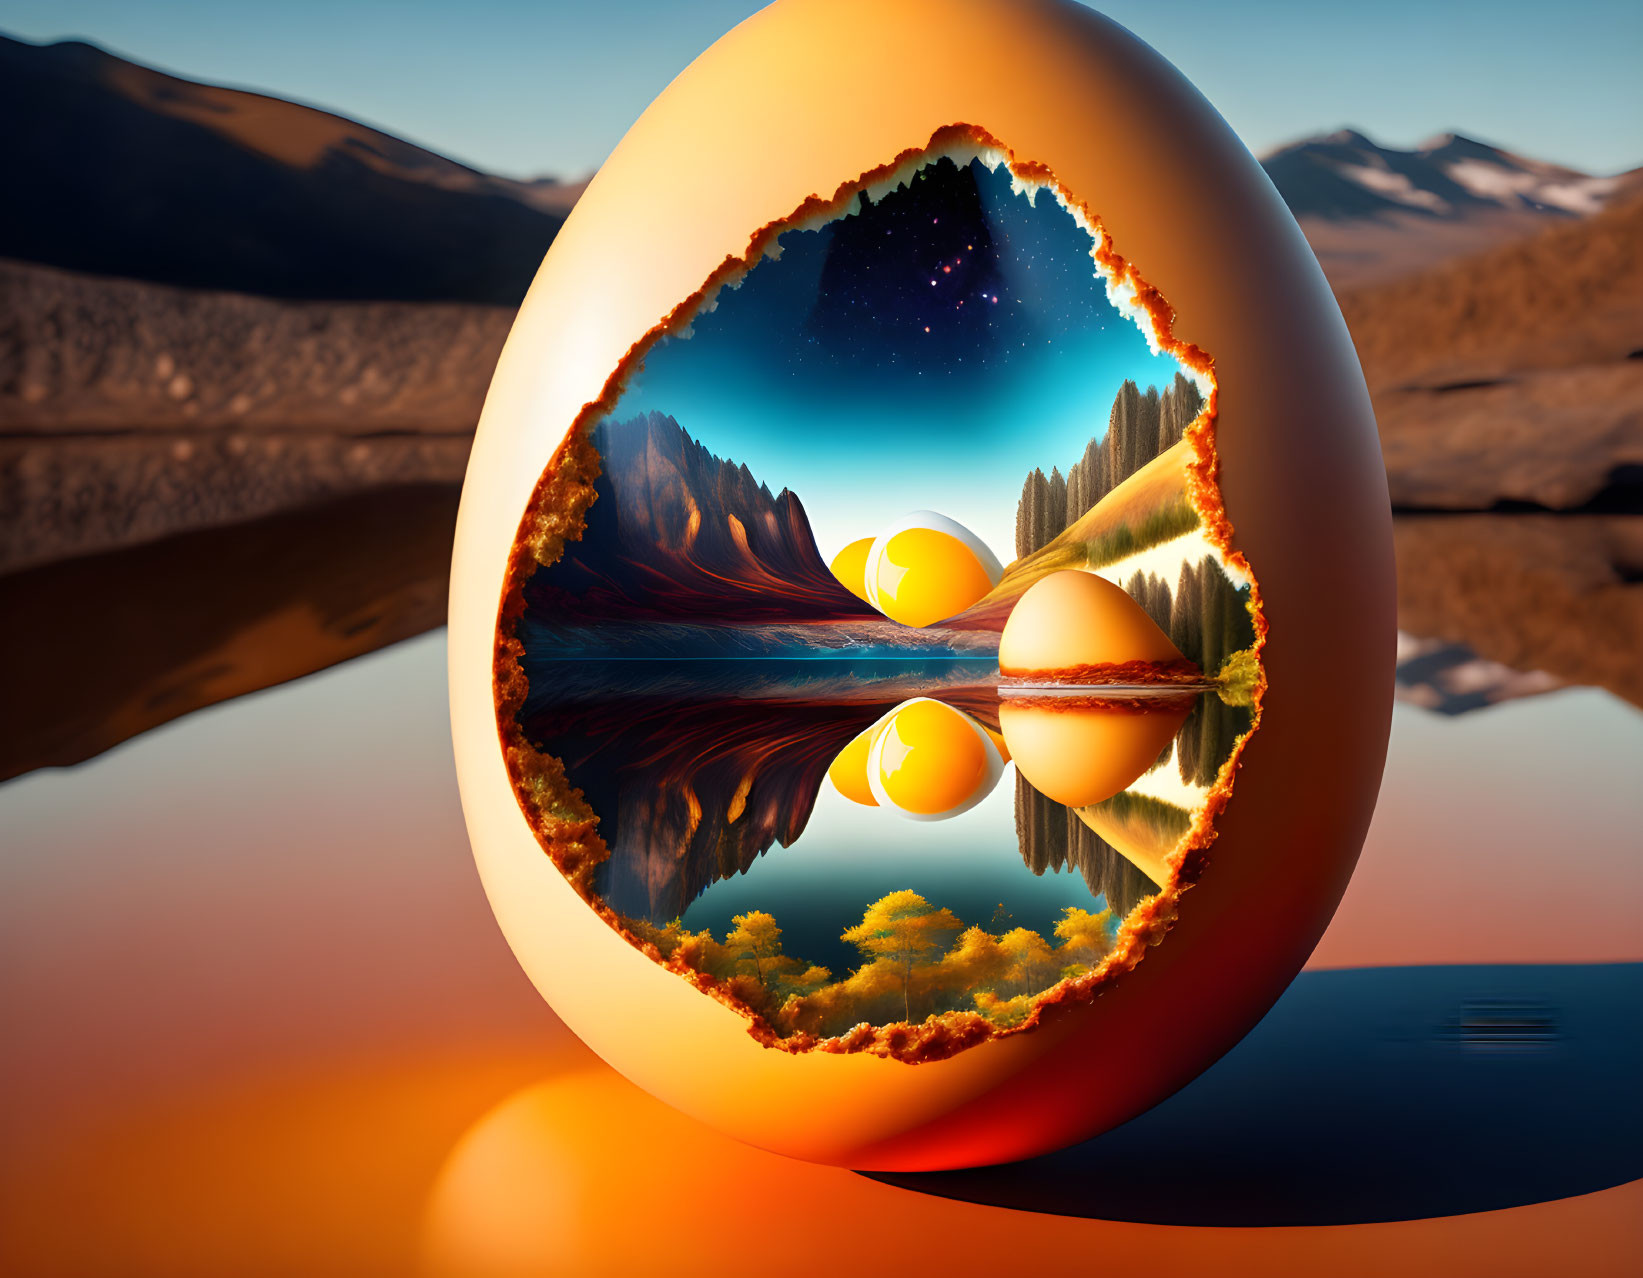 Cracked egg unveils surreal landscape with mountains and starry sky